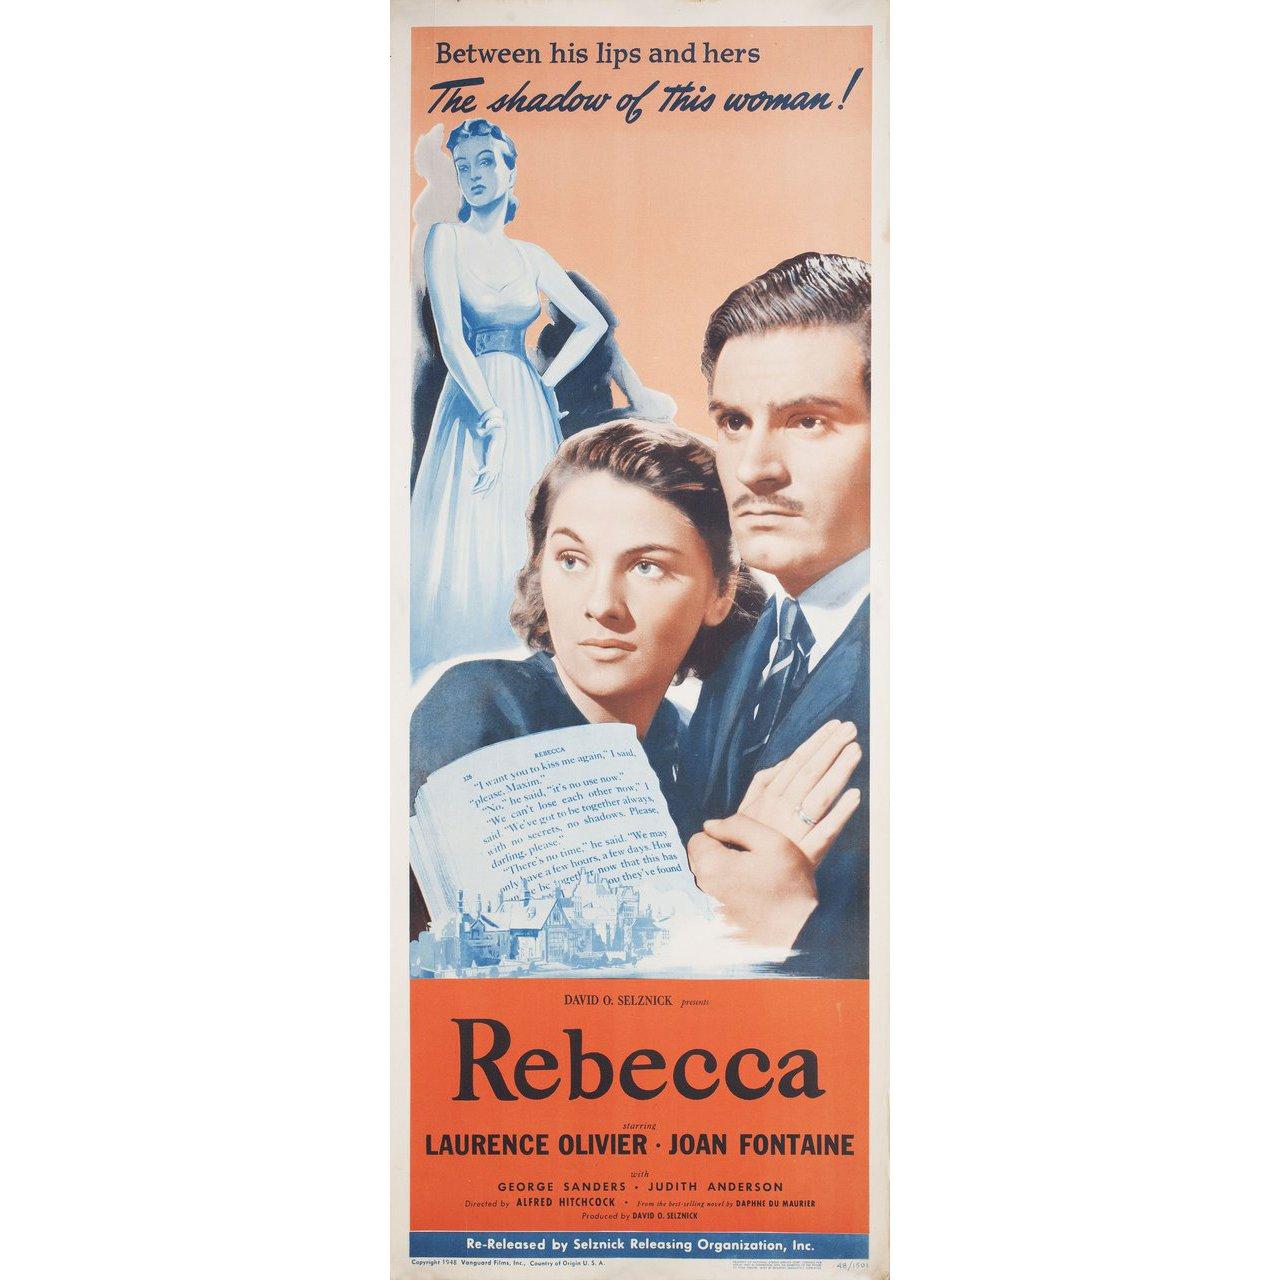 Original 1948 re-release U.S. insert poster for the 1940 film Rebecca directed by Alfred Hitchcock with Laurence Olivier / Joan Fontaine / George Sanders / Judith Anderson. Very good-fine condition, rolled. Please note: the size is stated in inches